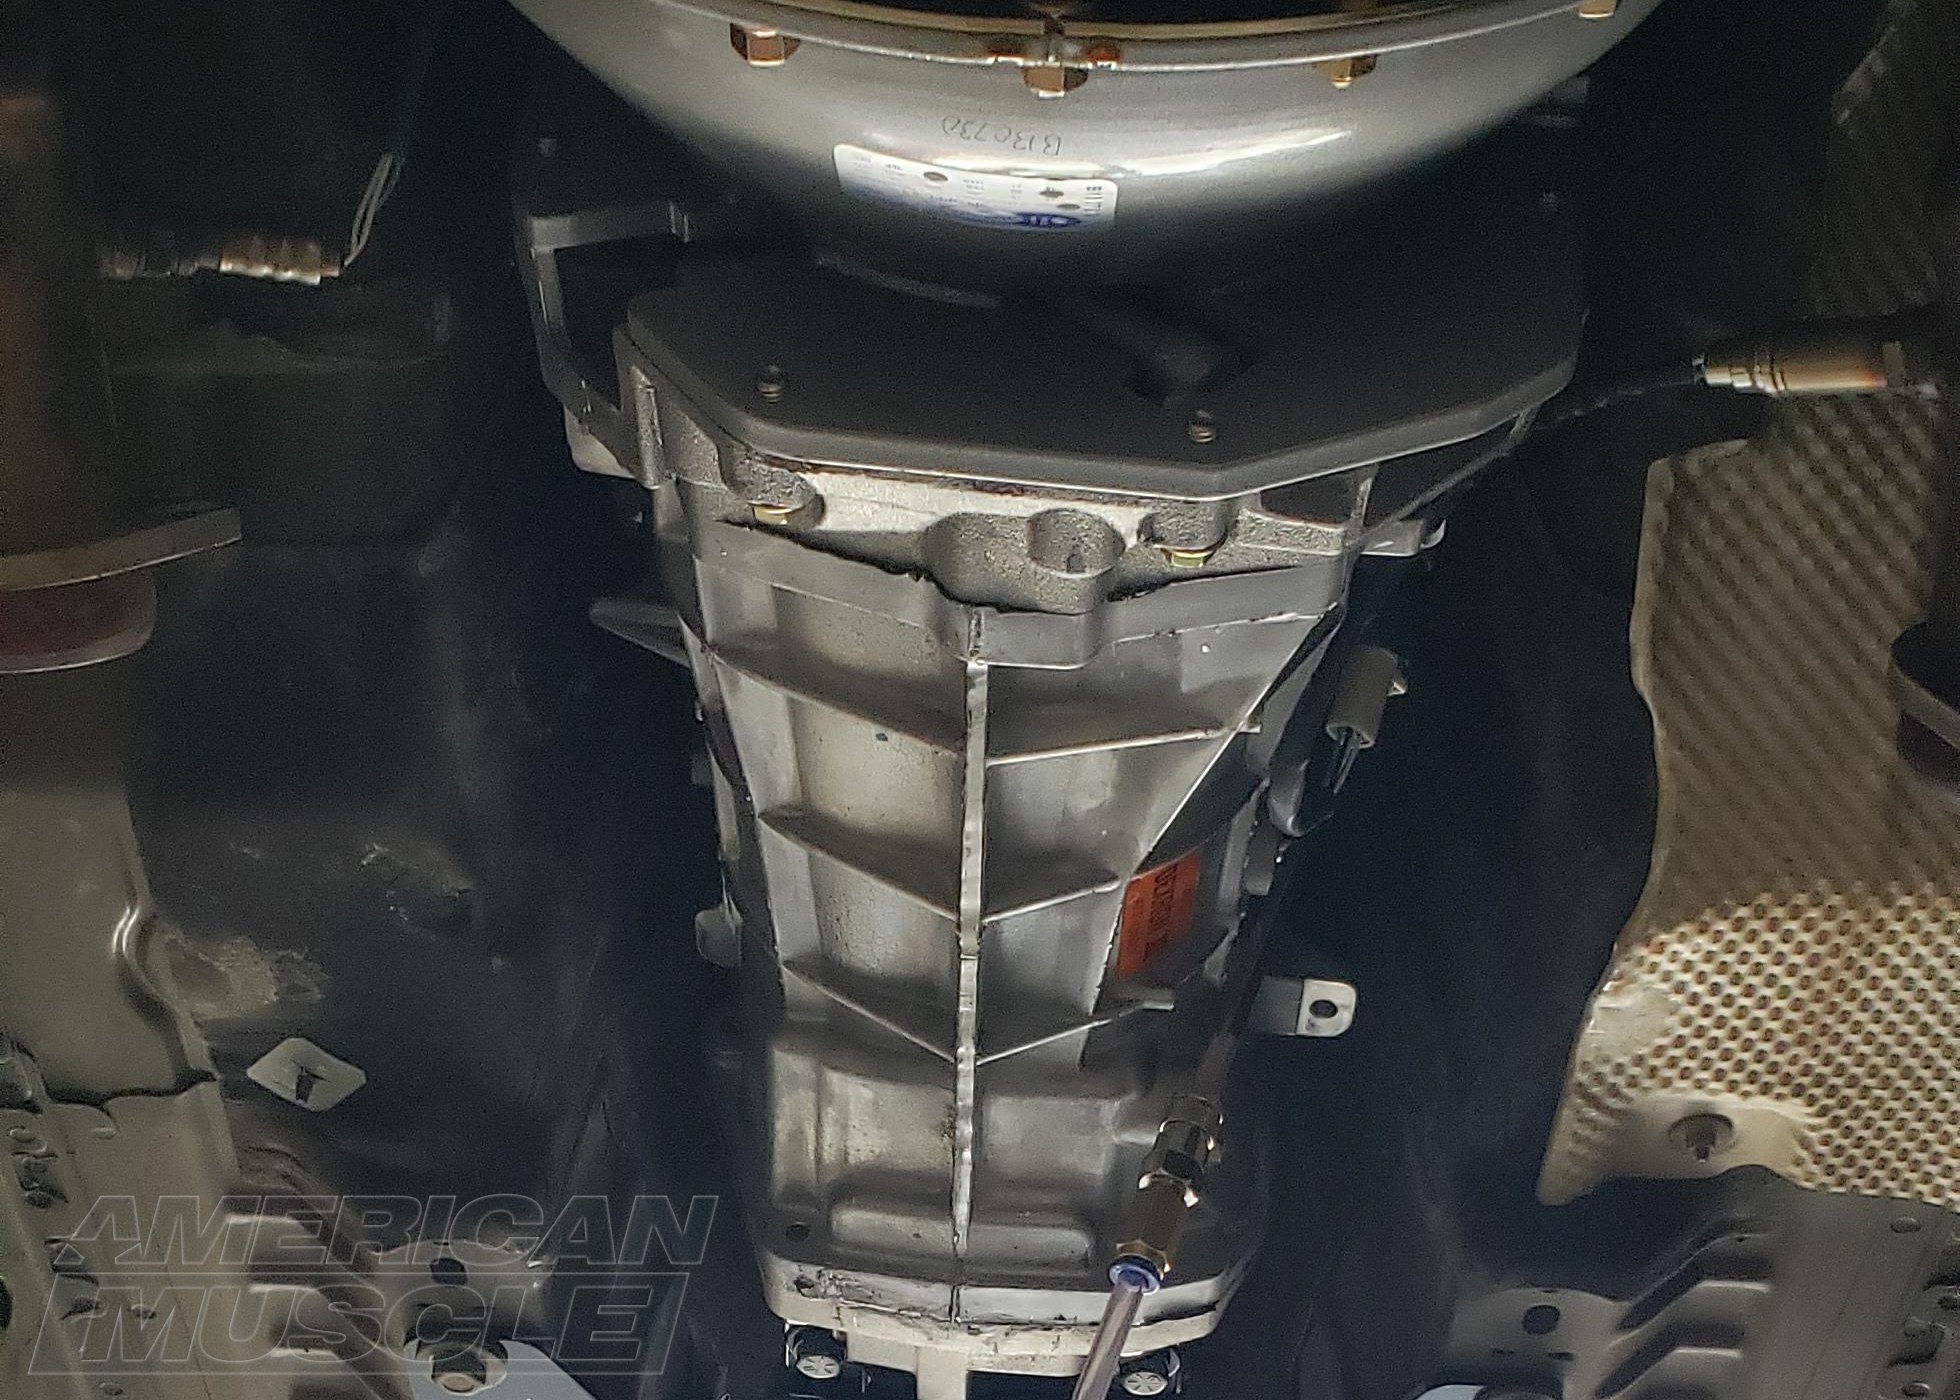 2010 Mustang with Ford Performance T56 Transmission Installed